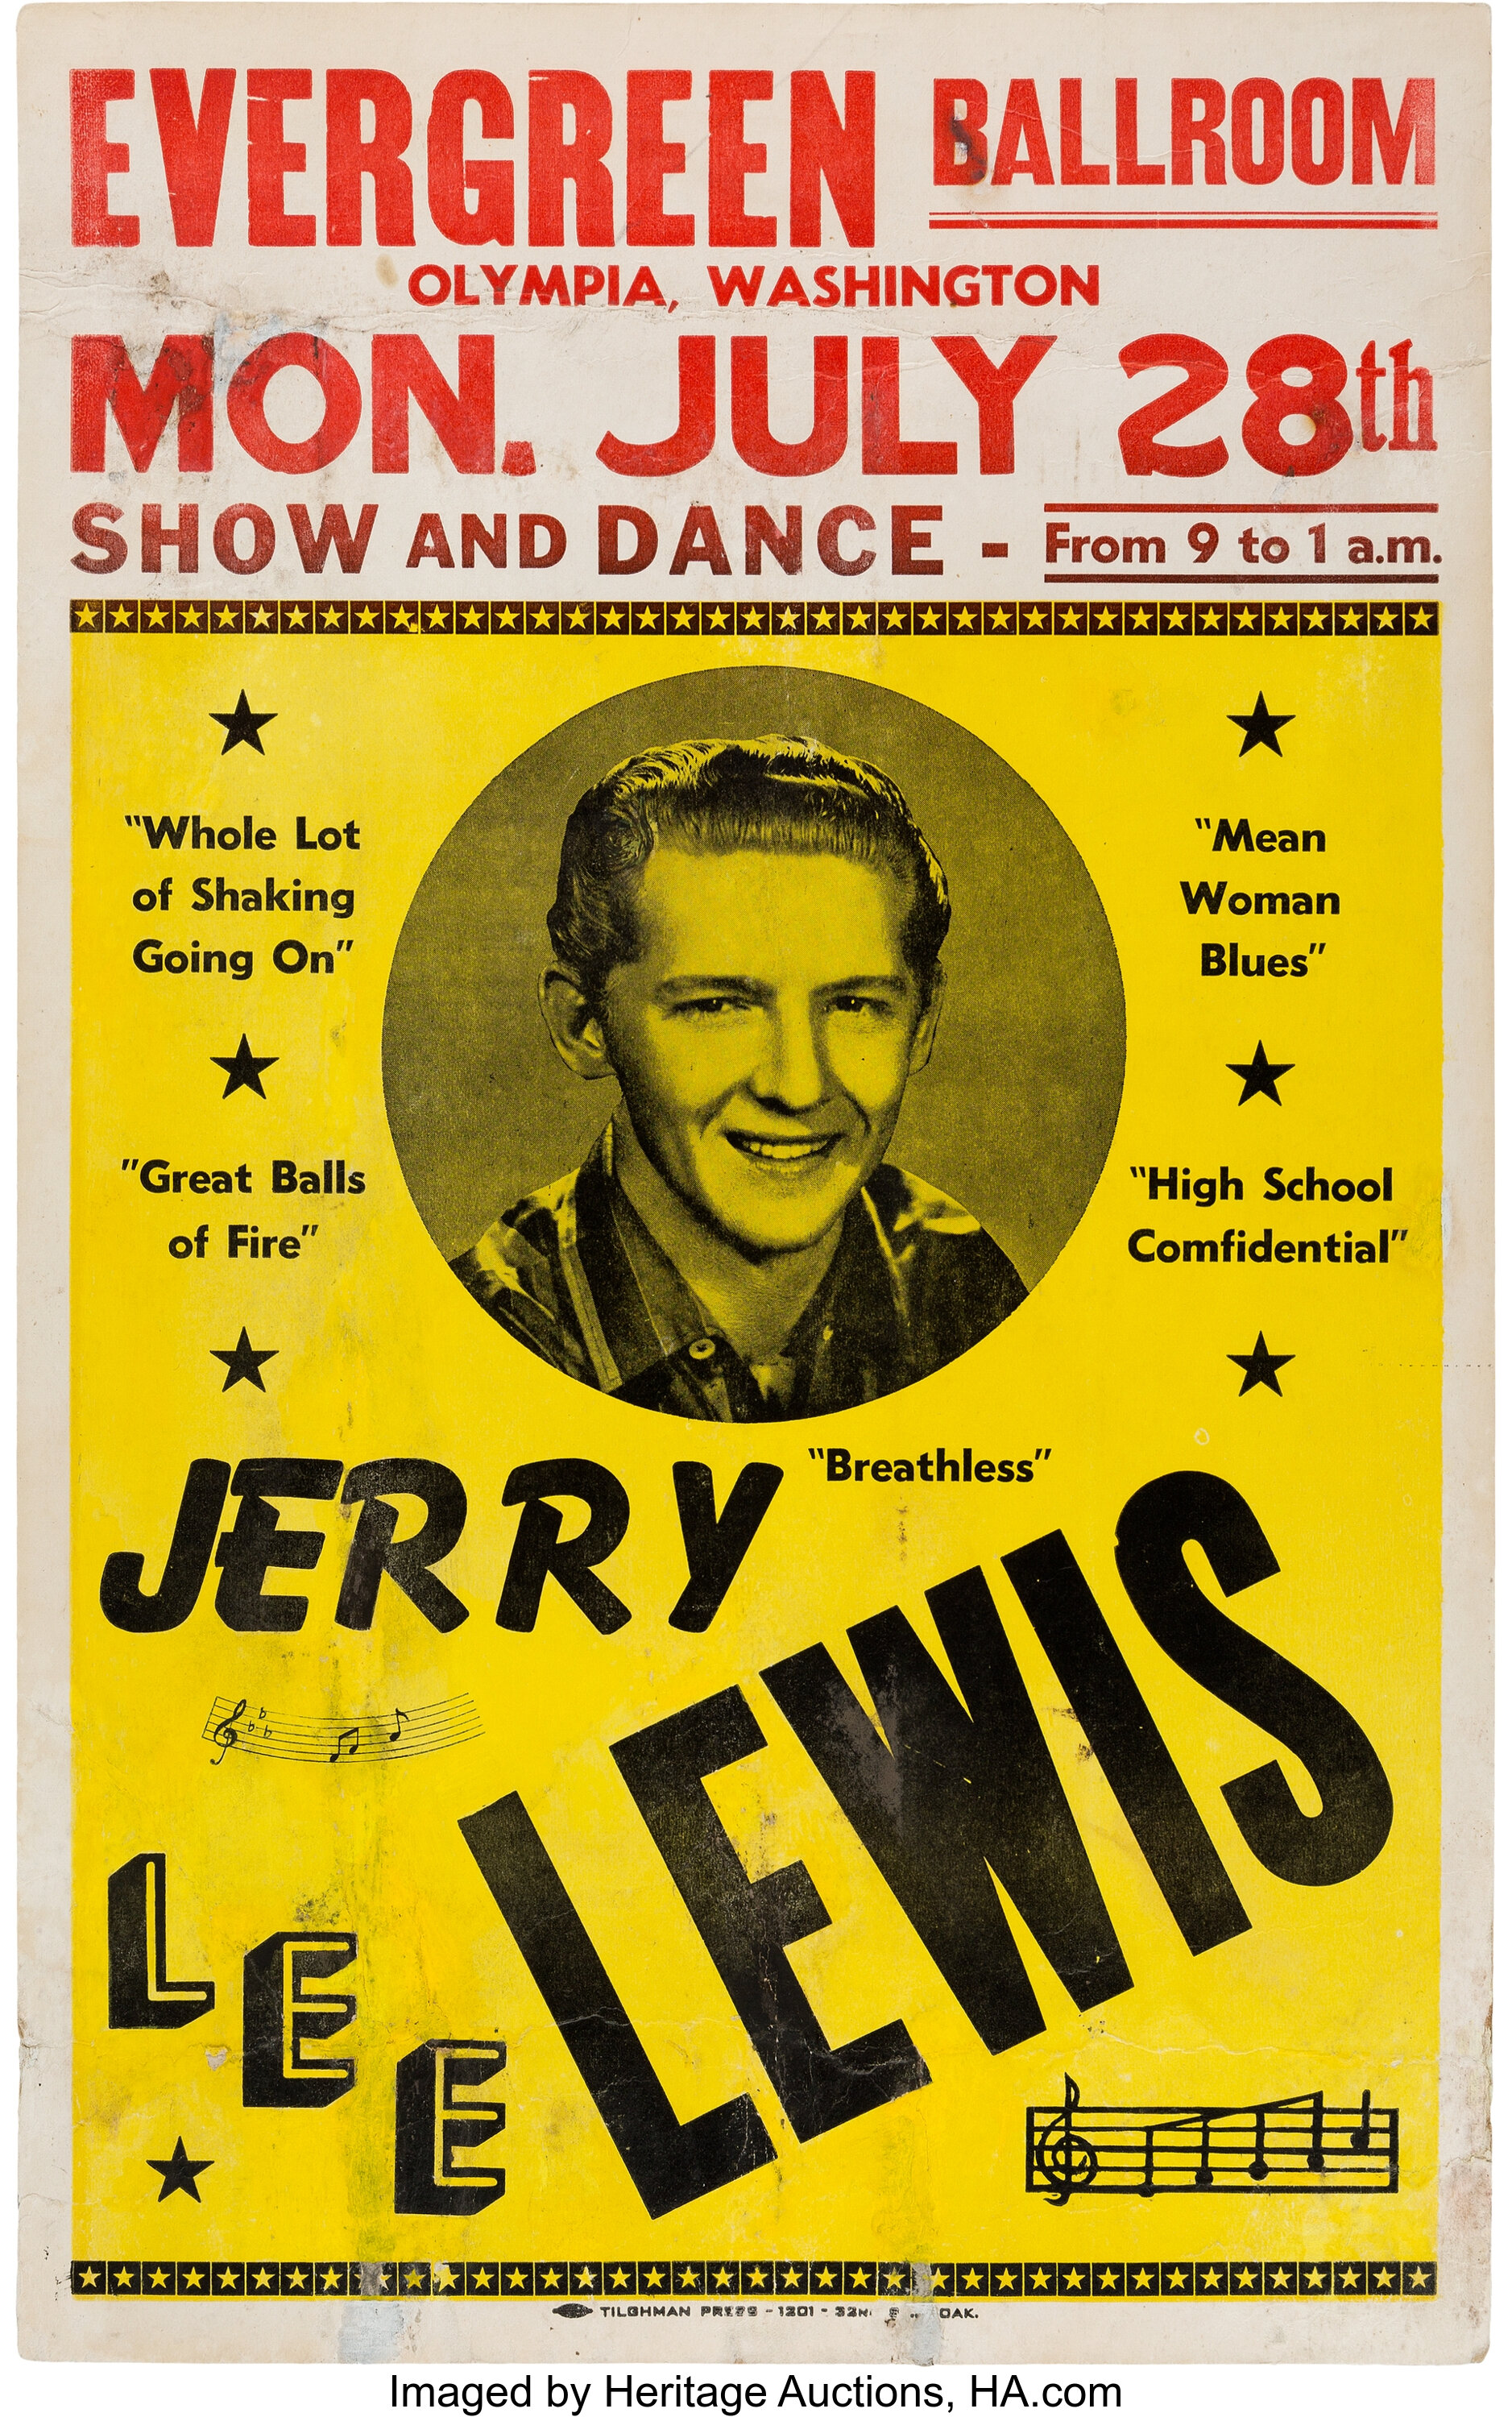 Jerry Lee Lewis Evergreen Ballroom Concert Poster (1958). Extremely